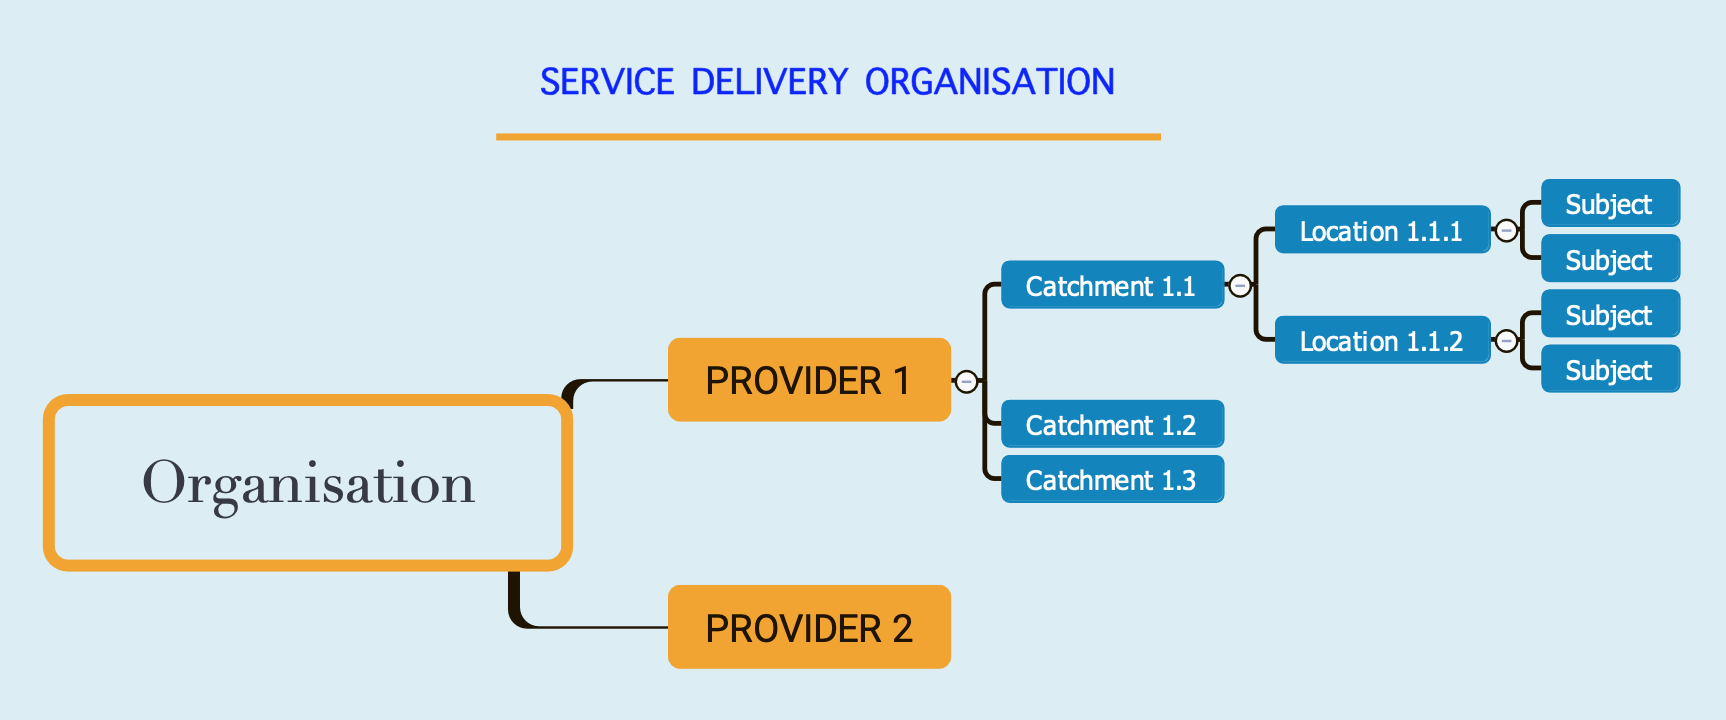 During organisation setup the implementer or customer IT person sets up catchments with locations and assigns them to the provider (field user)